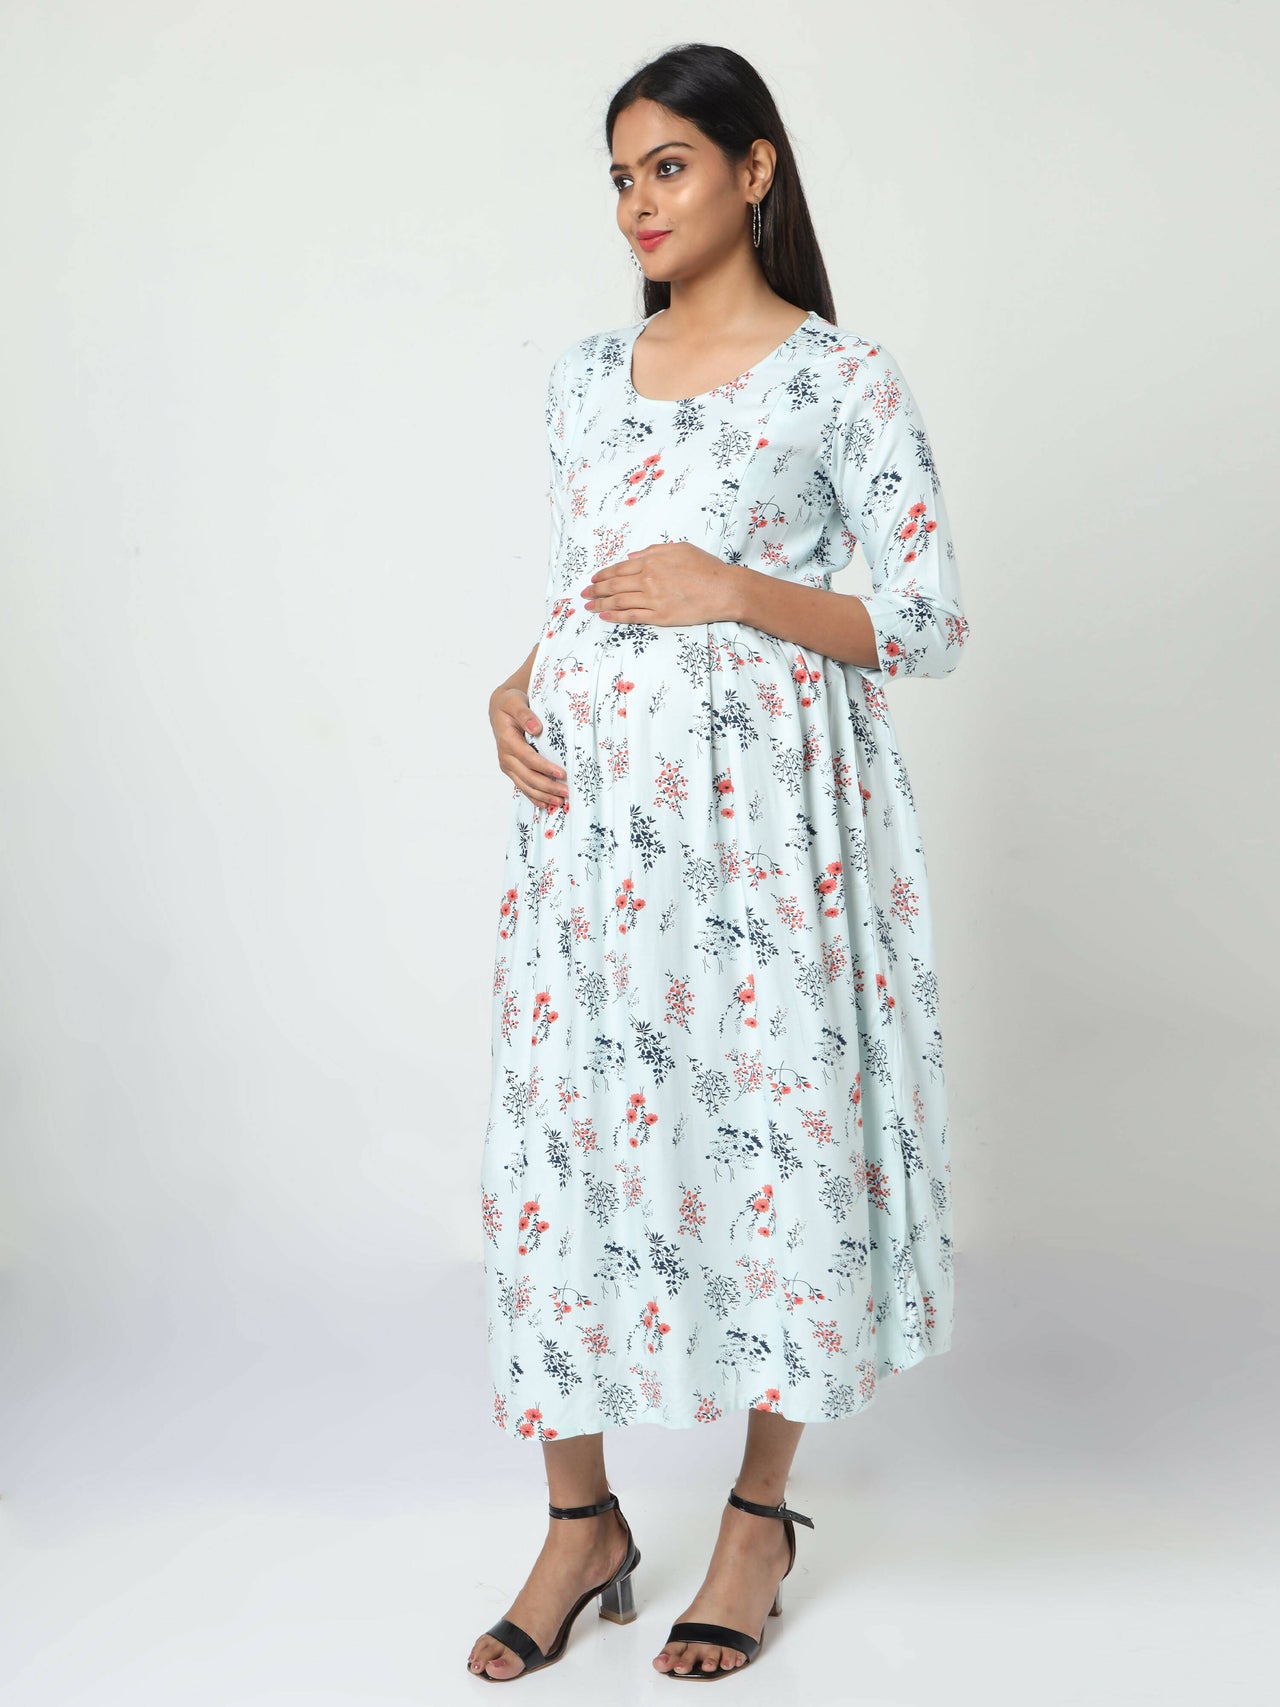 Manet Three Fourth Maternity Dress Floral Print With Concealed Zipper Nursing Access - Pista Green - Distacart